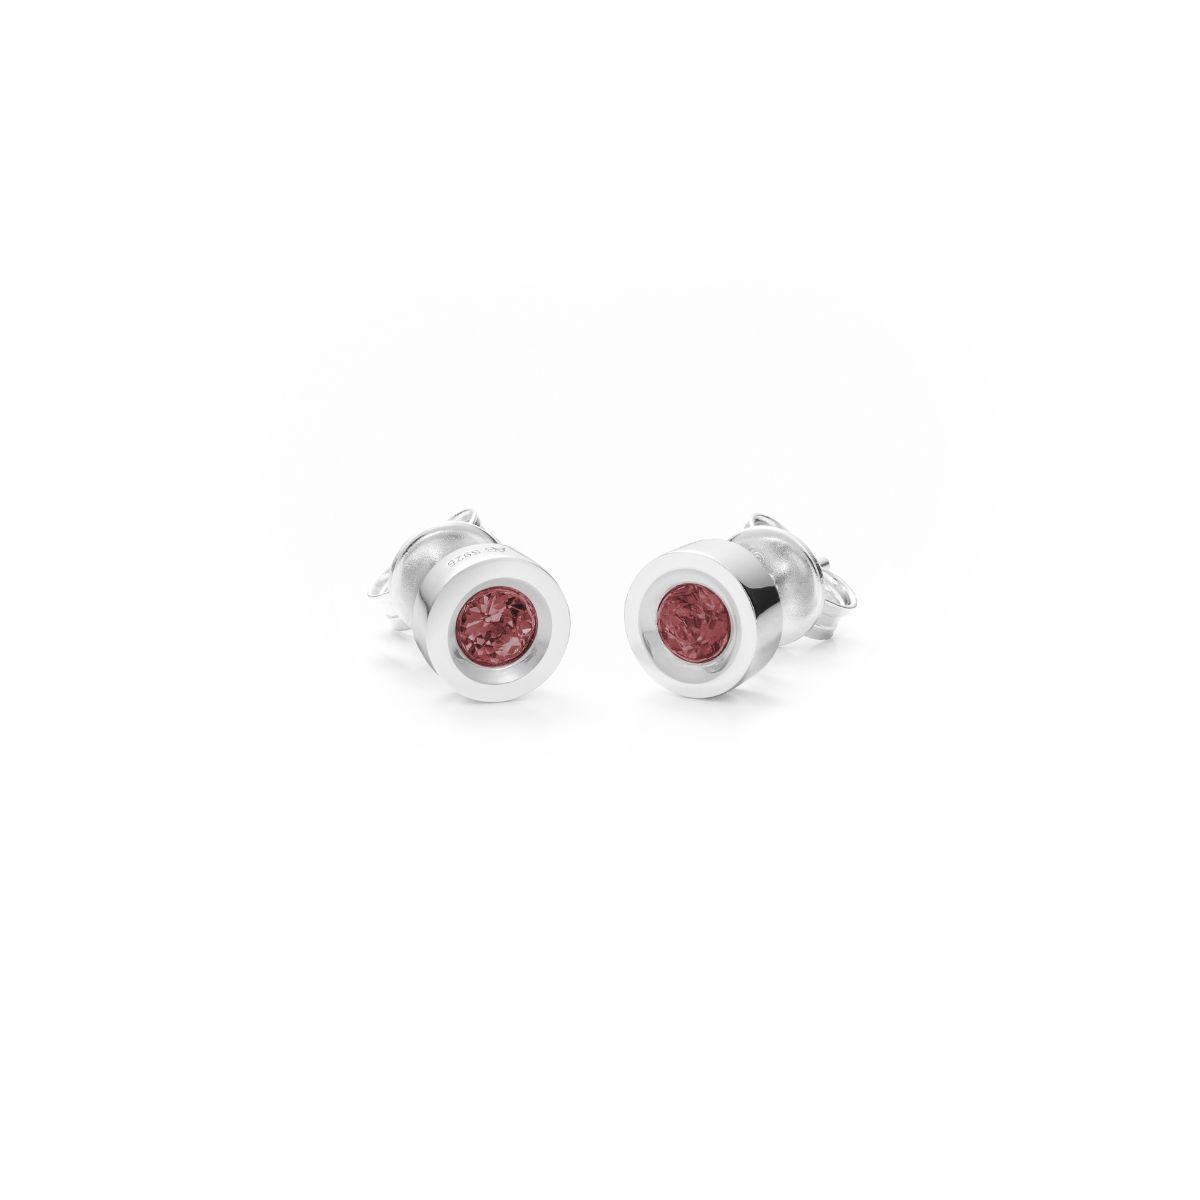 SMALL SILVER AND NATURAL GARNET EARRINGS